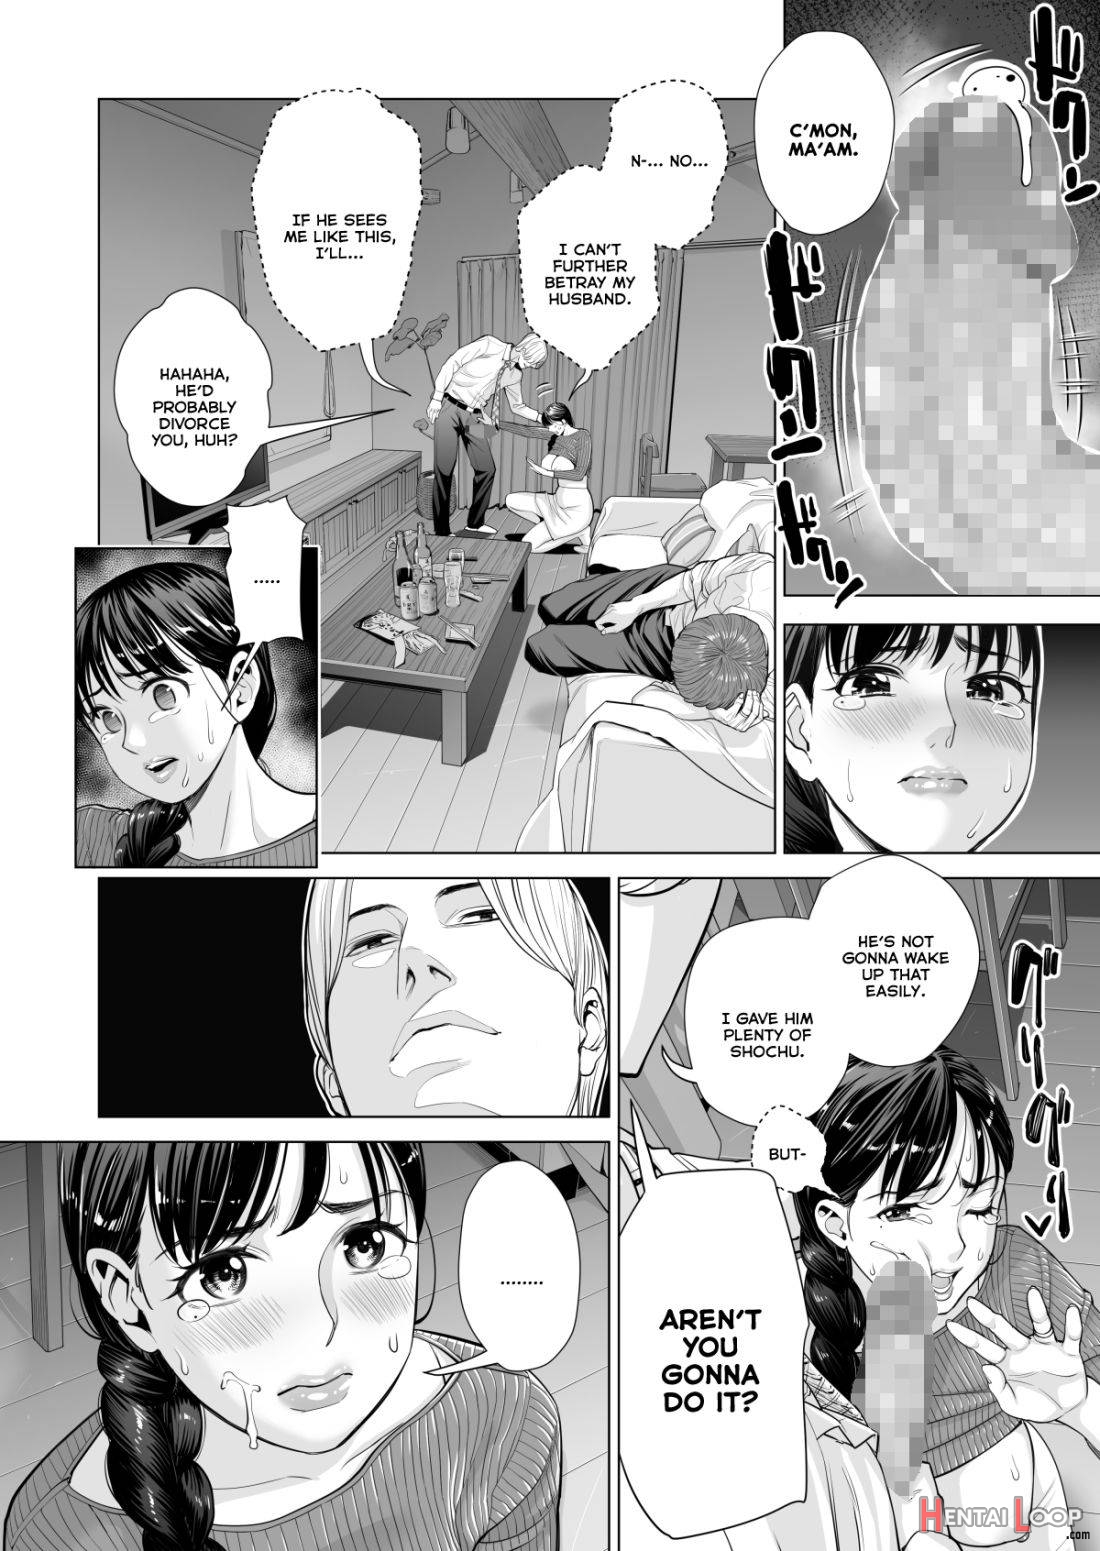 Tsukiyo no Midare Zake (Kouhen) Moonlit Intoxication ~ A Housewife Stolen by a Coworker Besides her Blackout Drunk Husband ~ Chapter 2 page 12